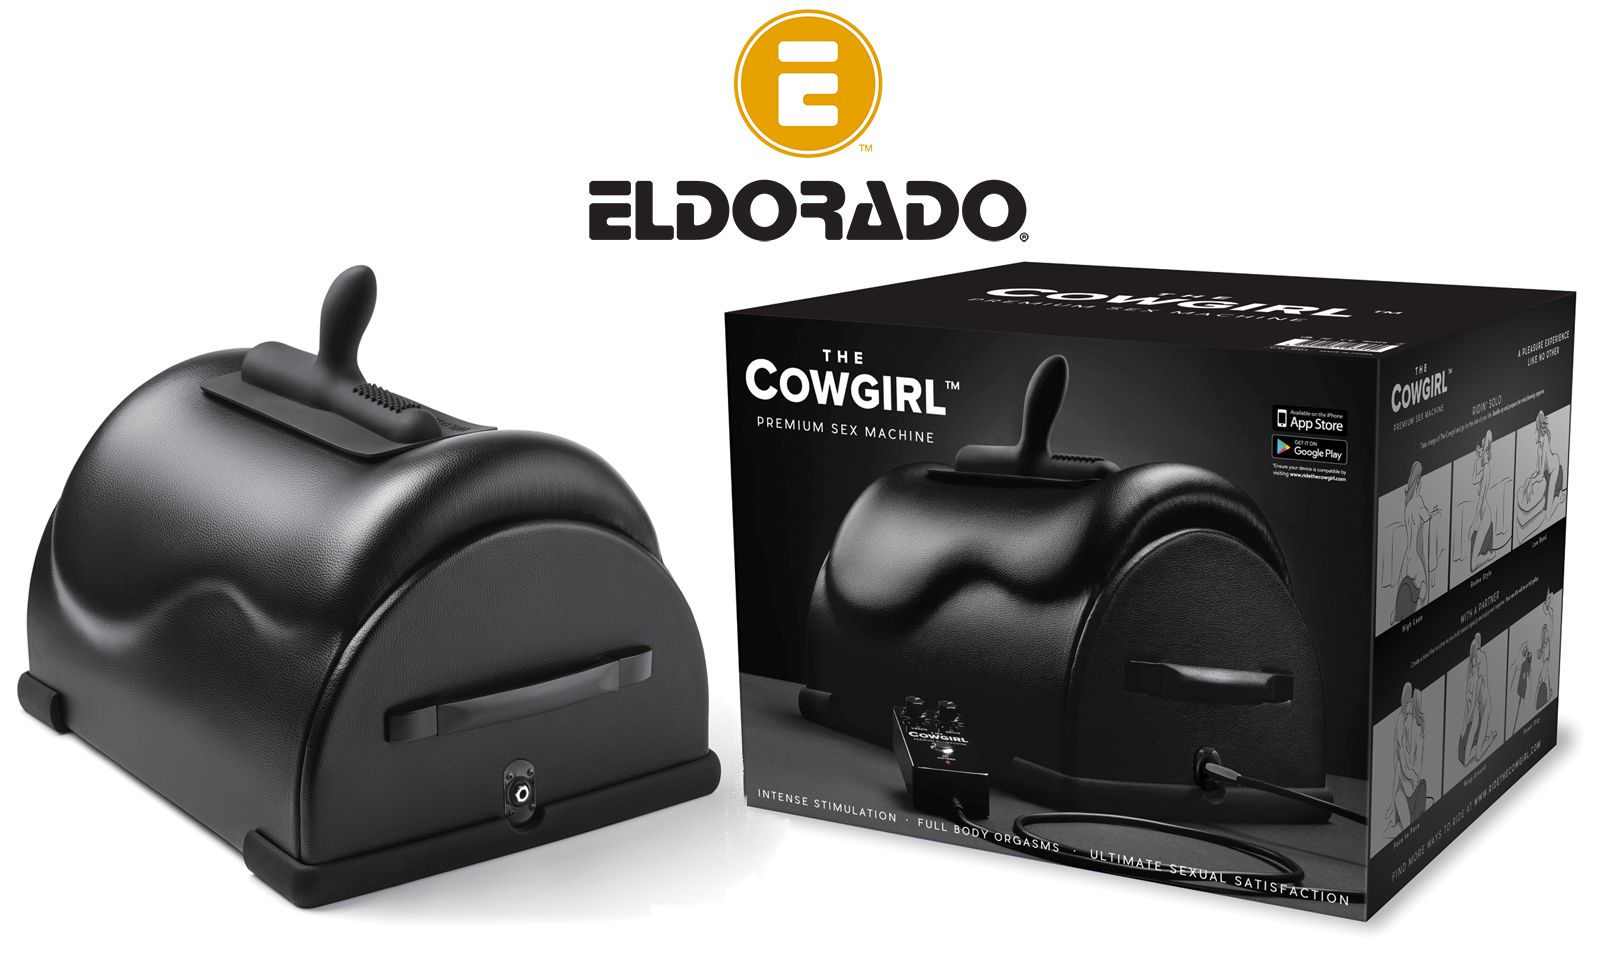 Eldorado Customers Can Saddle Up With the Cowgirl